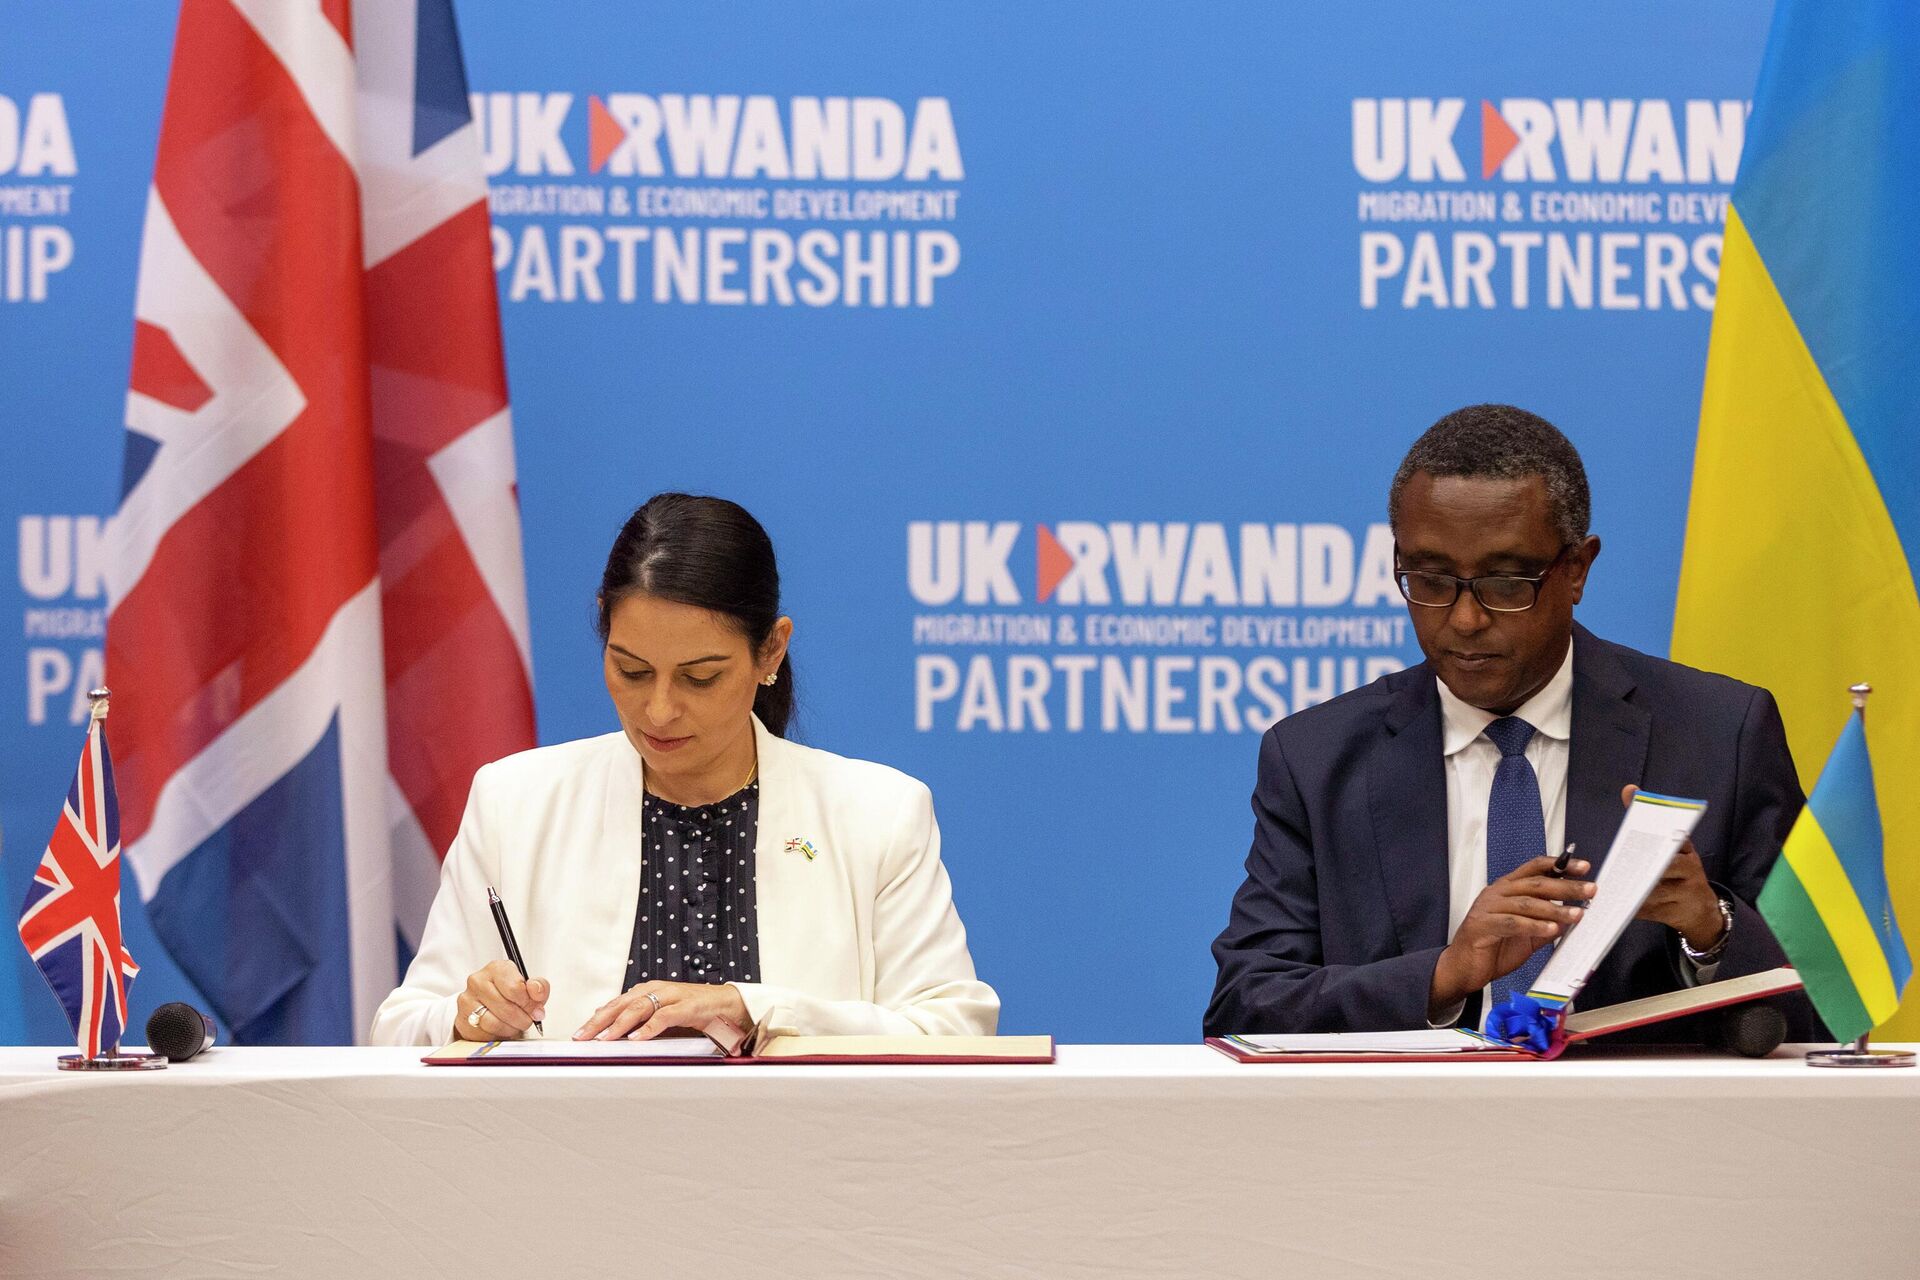 Britain's Home Secretary Priti Patel, left, and Rwanda's Minister of Foreign Affairs Vincent Biruta, right, sign what the two countries called an economic development partnership in Kigali, Rwanda Thursday, April 14, 2022. Britain's Conservative government has struck a deal to send some asylum-seekers thousands of miles away to Rwanda, a move that British opposition politicians and refugee groups condemned as inhumane, unworkable and a waste of public money. (AP Photo/Muhizi Olivier) - Sputnik International, 1920, 10.09.2022